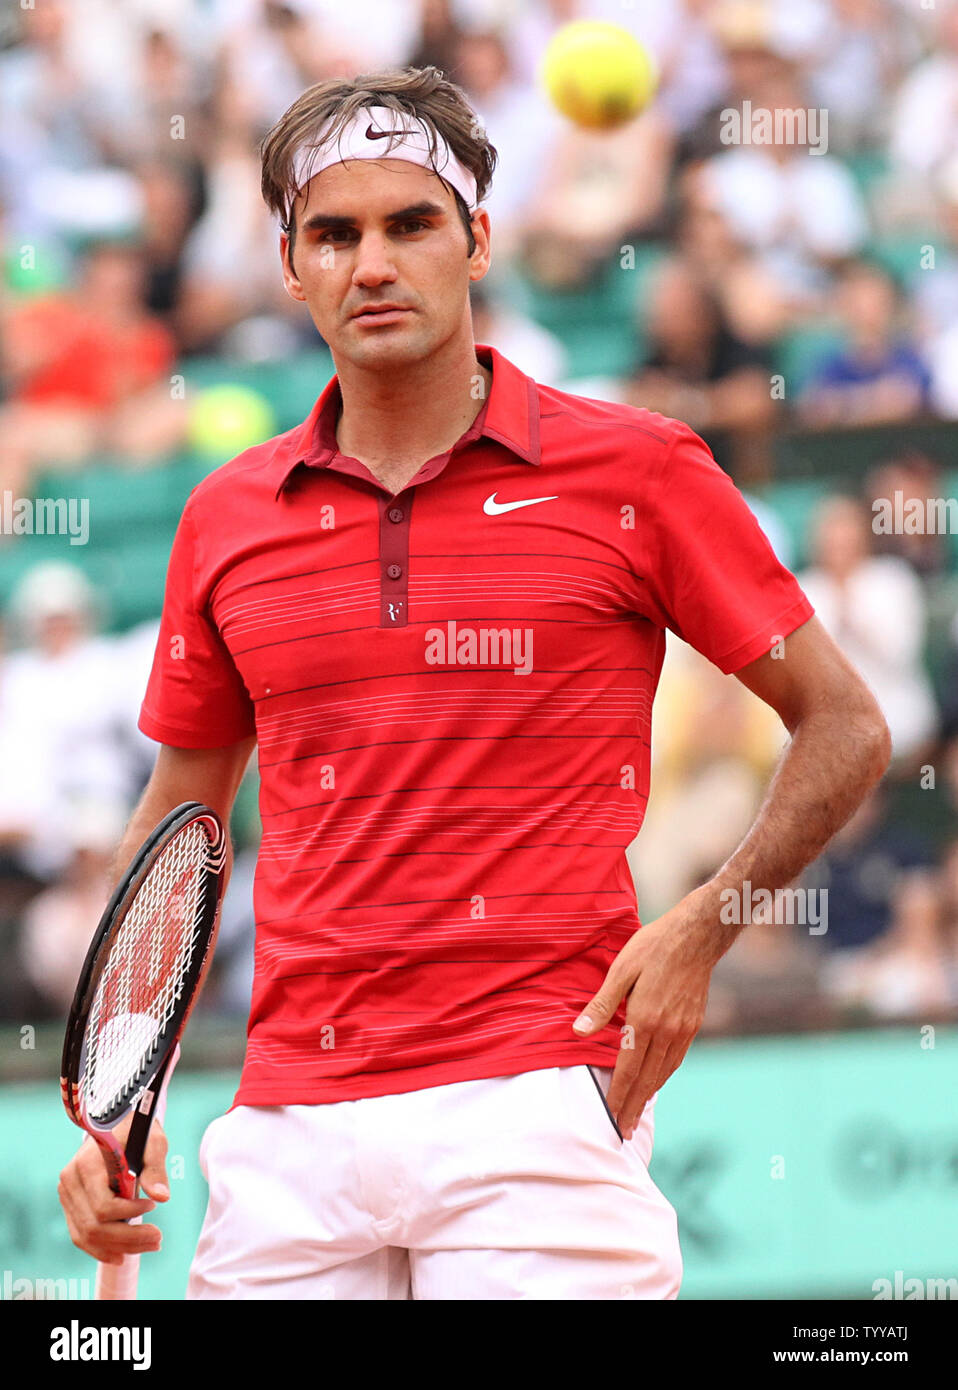 Roger Federer of Switzerland pauses between pointst during his French Open  mens semifinal match against Serbian Novak Djokovic at Roland Garros in  Paris on June 3, 2011. Federer defeated Djokovic 7-6 (5),